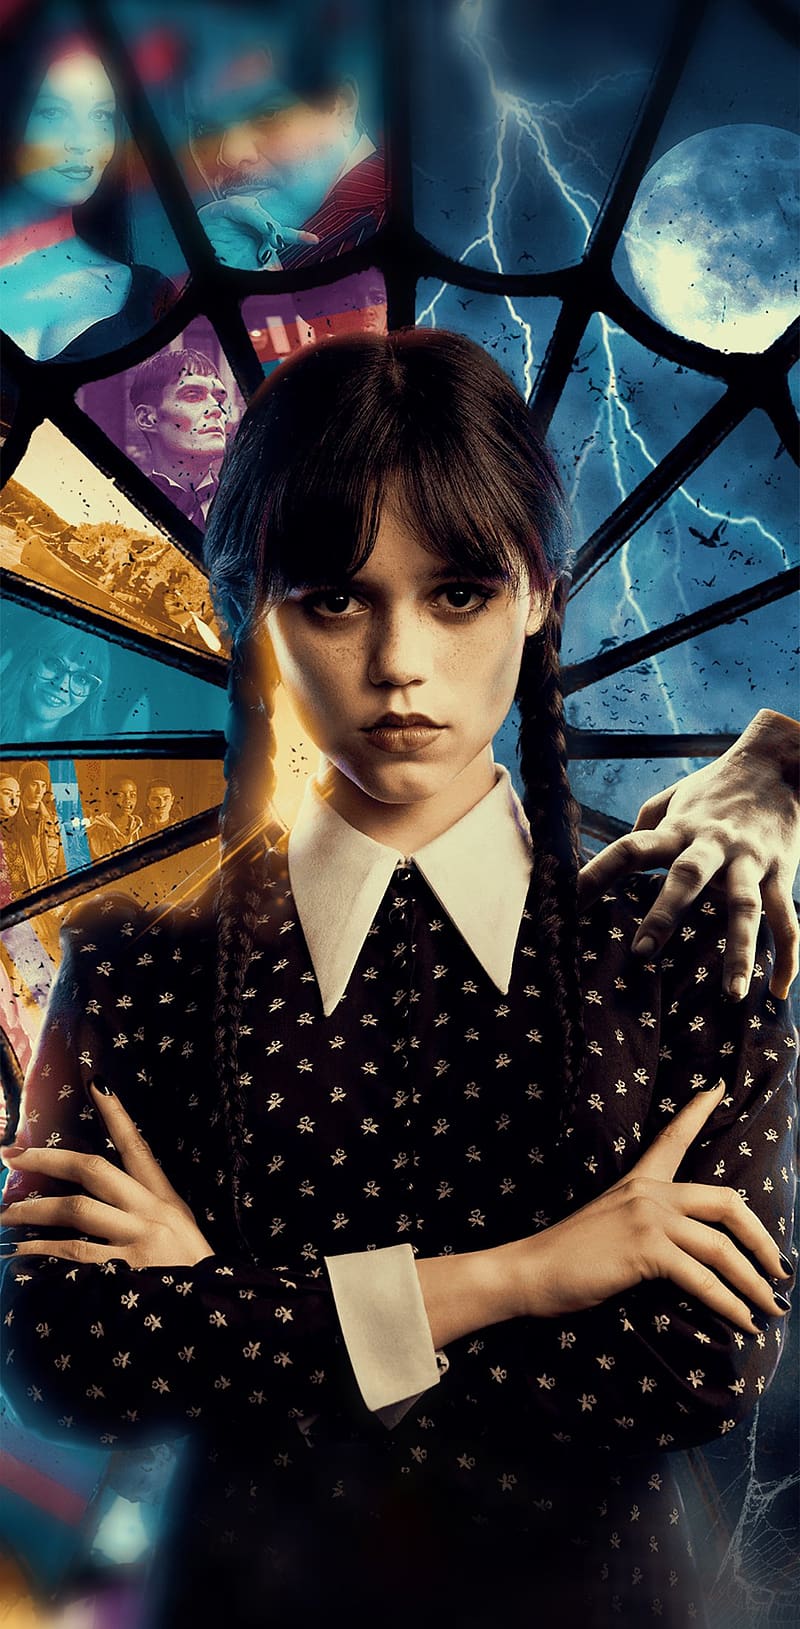 Wednesday Addams - Enid Maxi - Poster